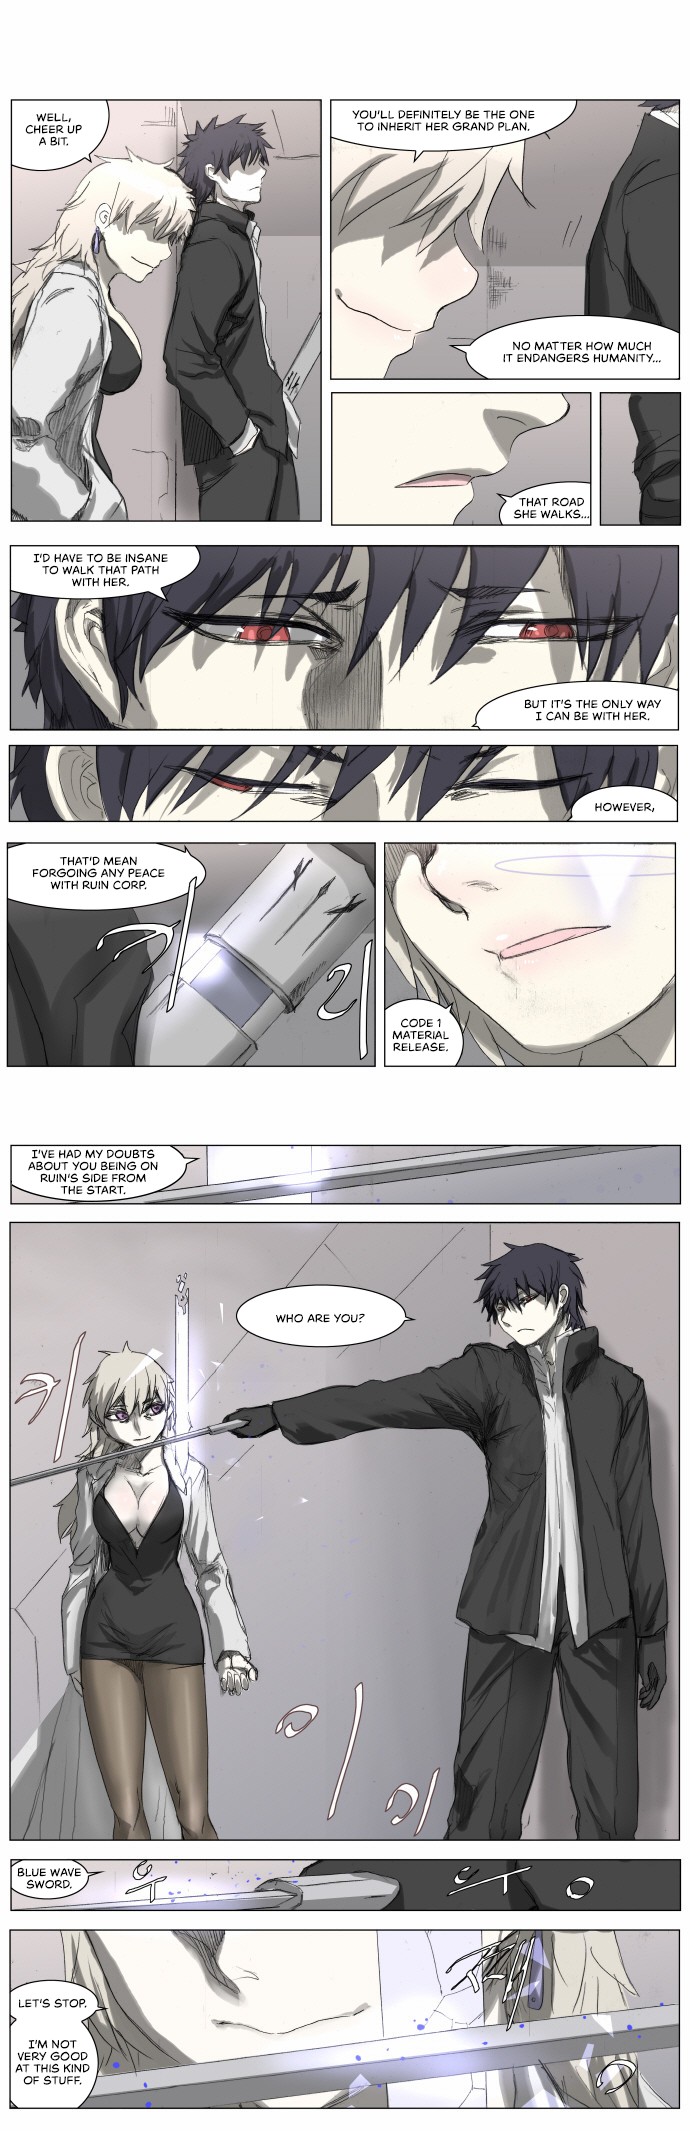 Knight Run Chapter 195: Hero - Extra Story 4 | Confession - Picture 1